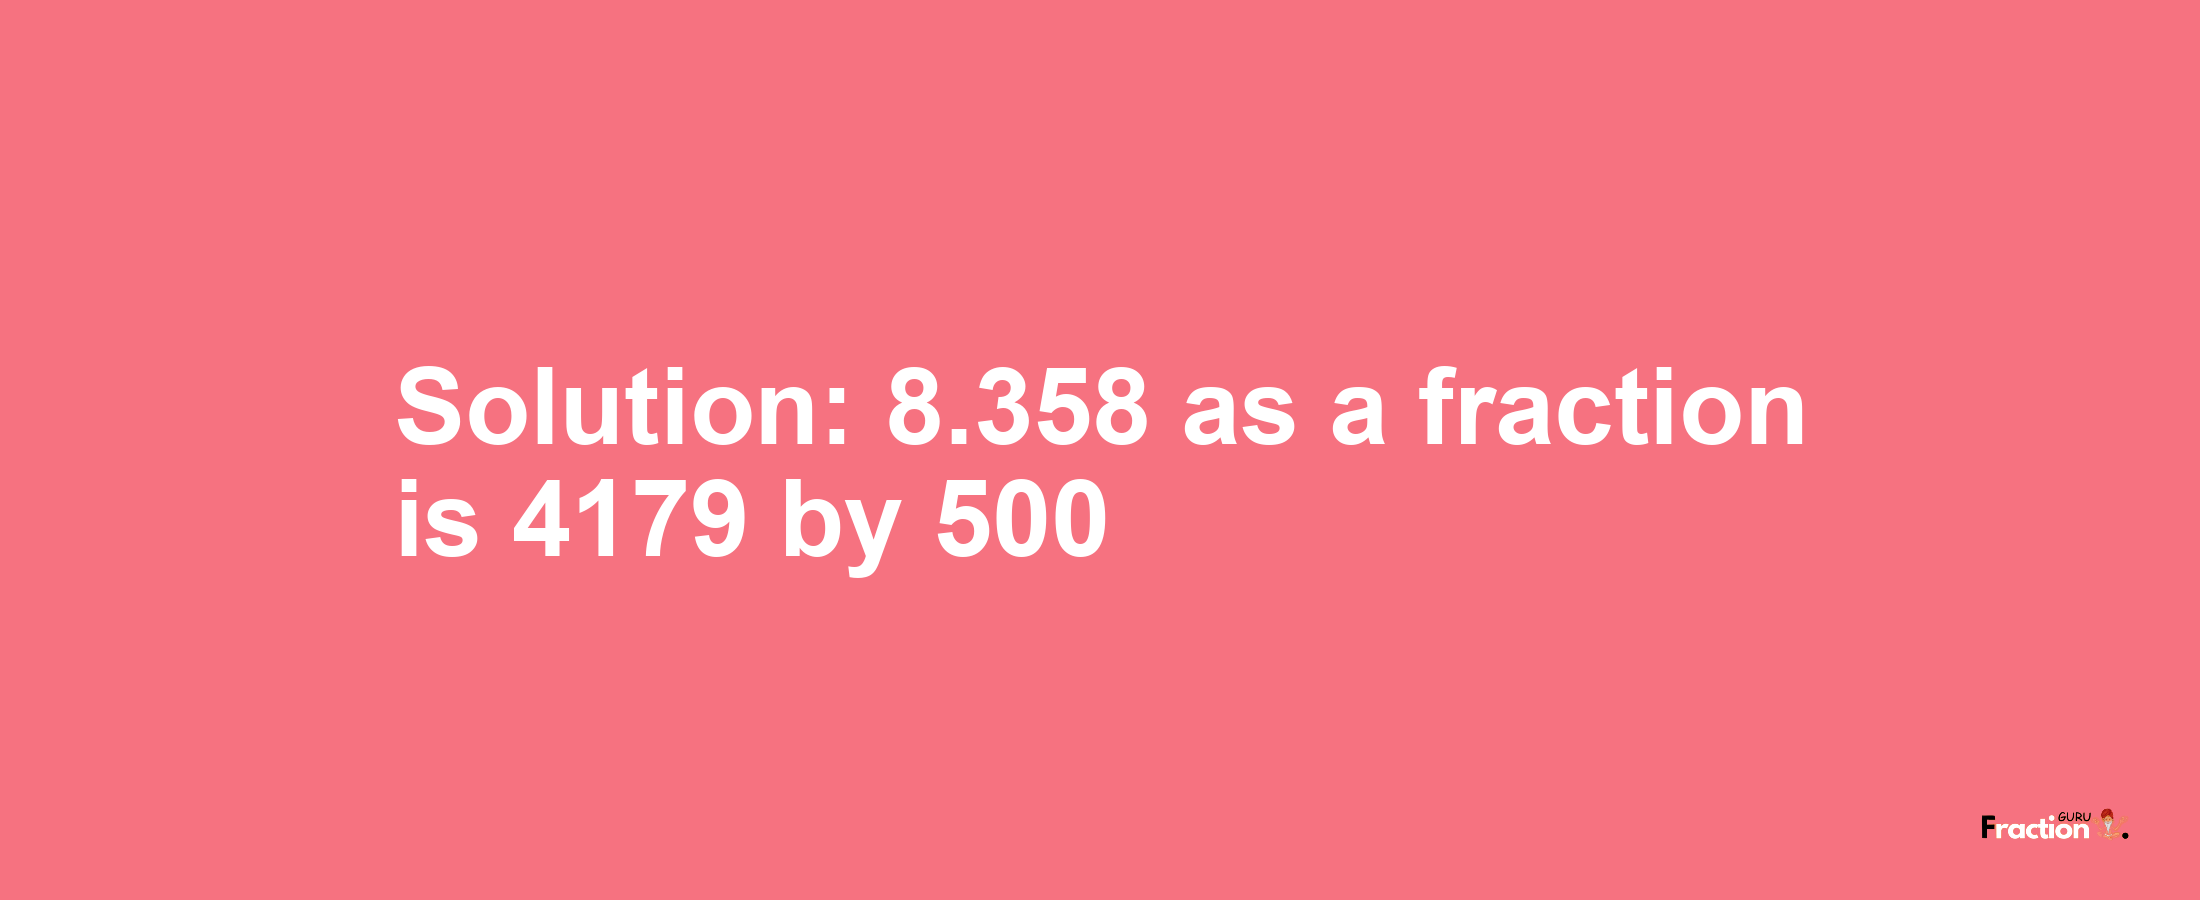 Solution:8.358 as a fraction is 4179/500